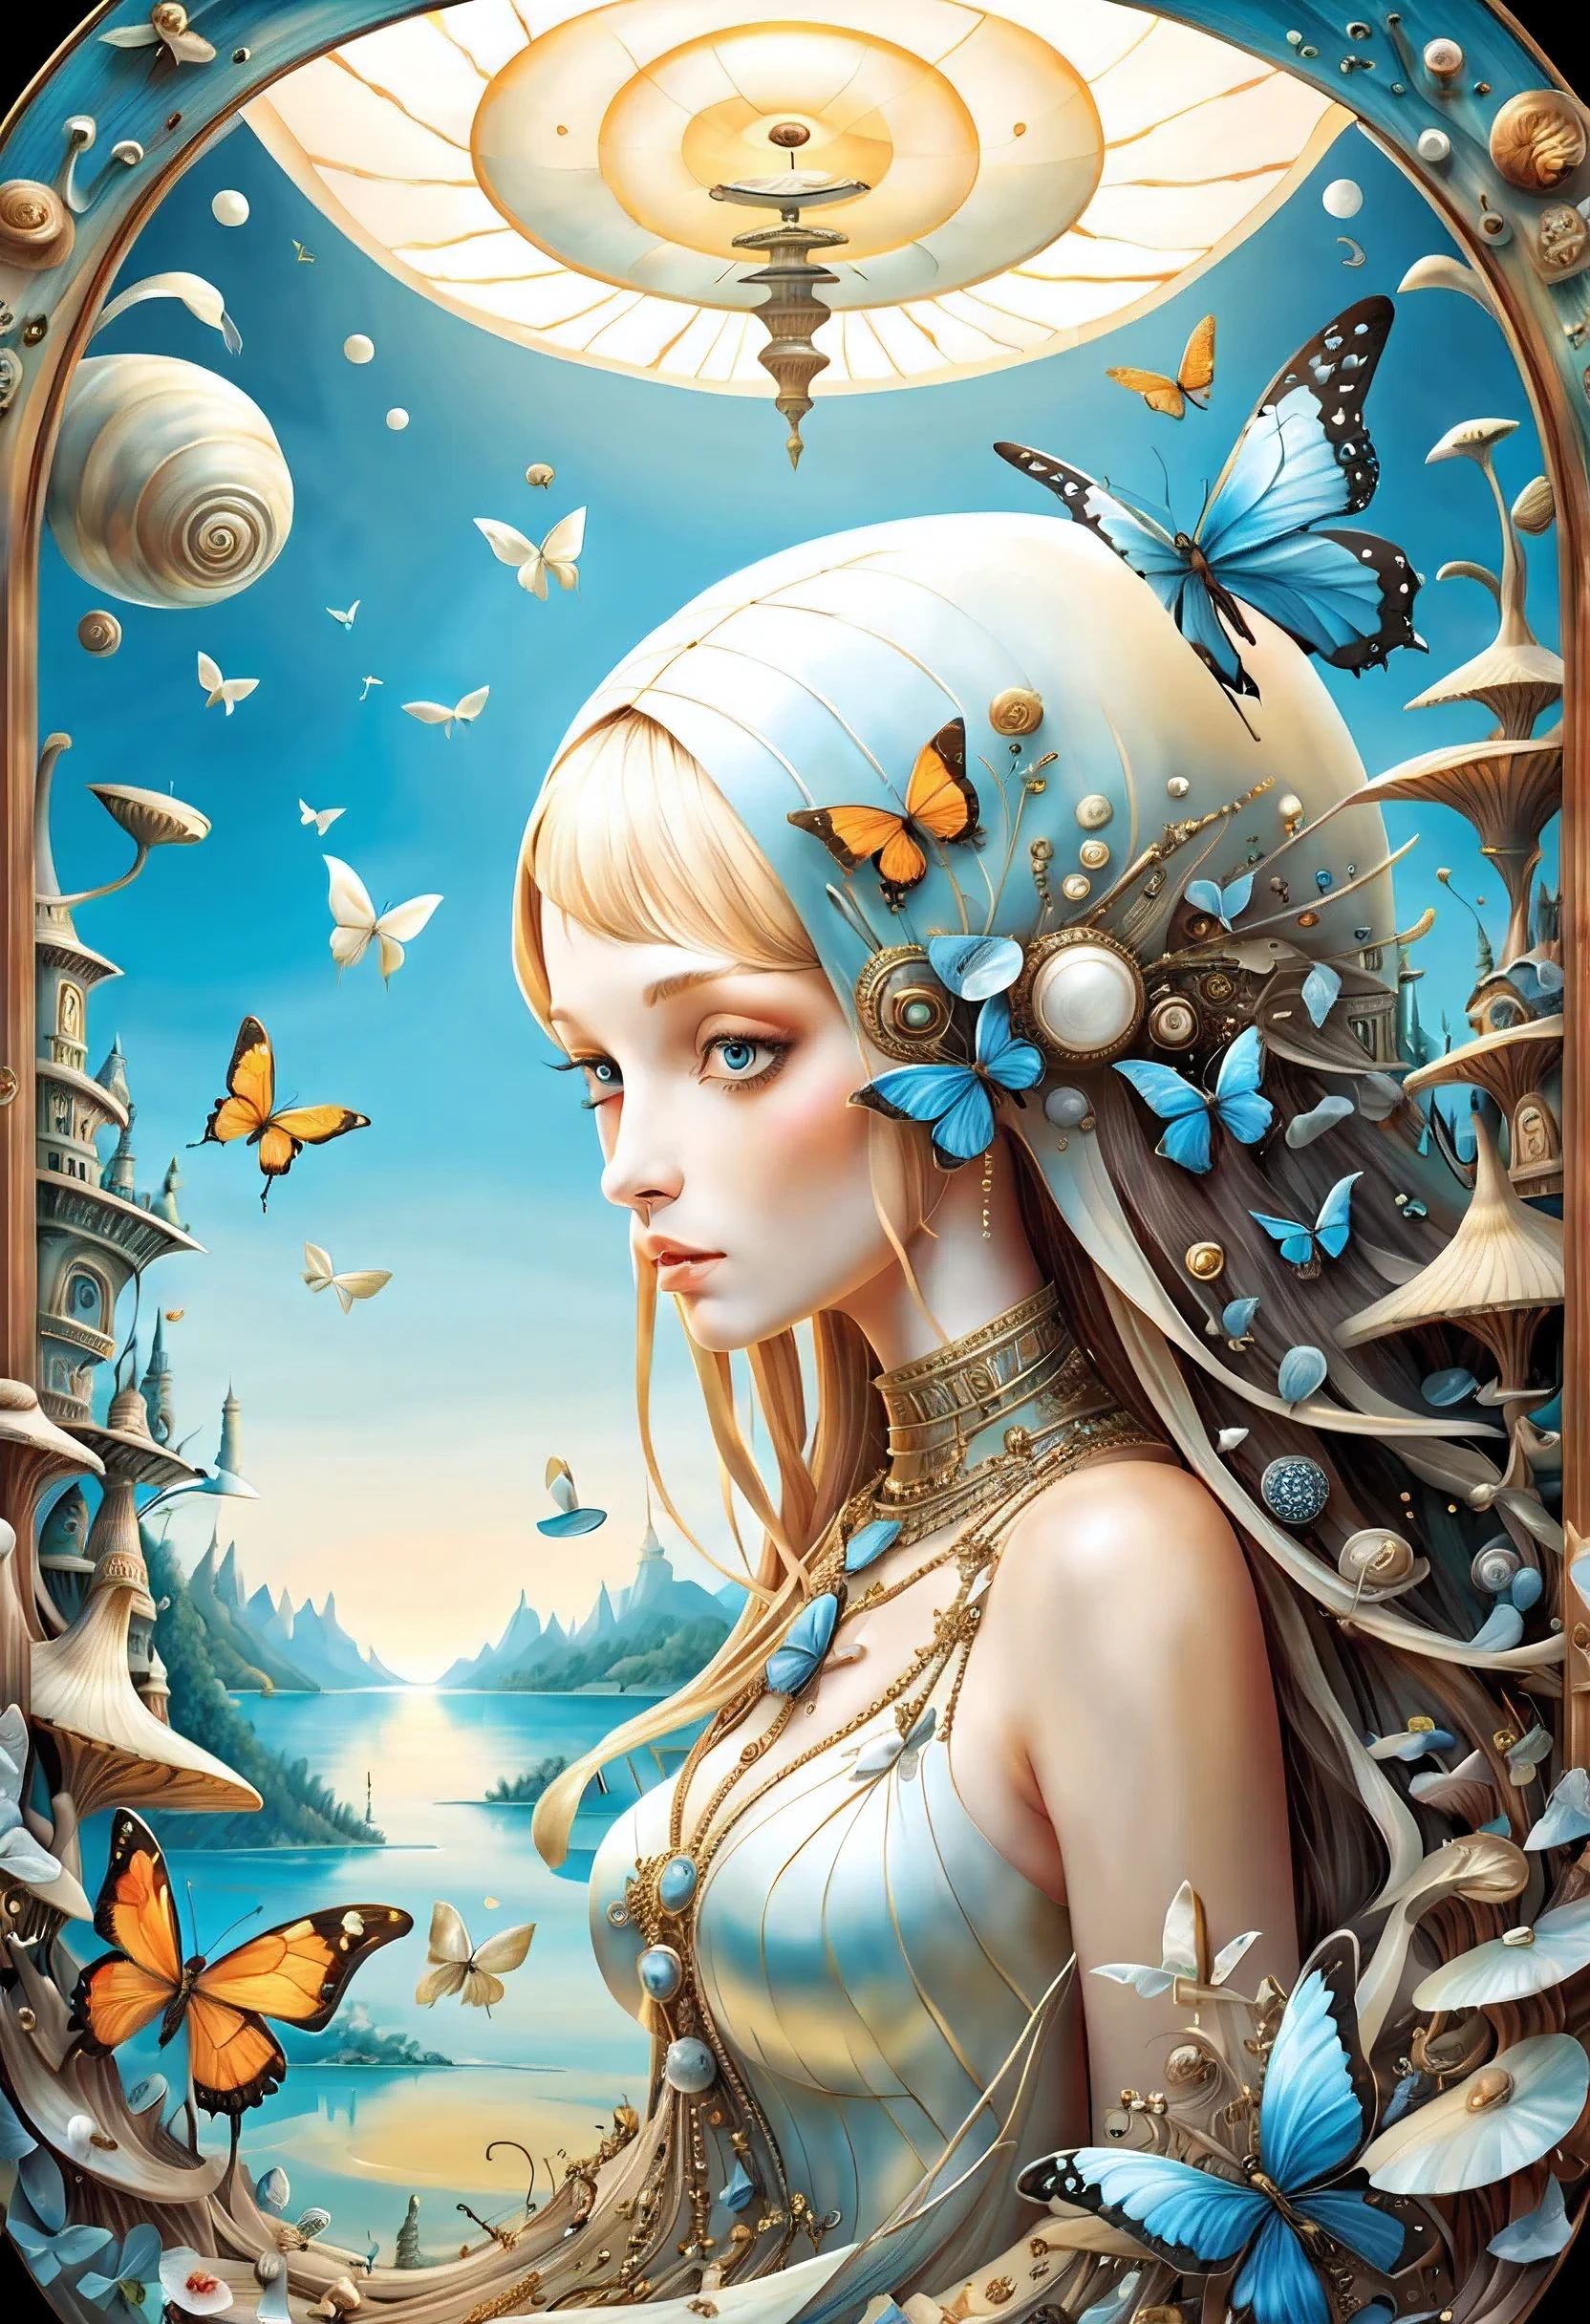 high quality, highly detailed, fantasy, At the forefront of this enchanting scene stands A Gorgeous Girl, a Mother of Pearl Loingloth .This surrealistic painting features(( Butterflys )) and Snail Houses draped over various objects computer, spaceship, Salvador Dalis face, in a dreamlike landscape. Its distorted reality and unsettling beauty in the style of Leonardo Davinchi,